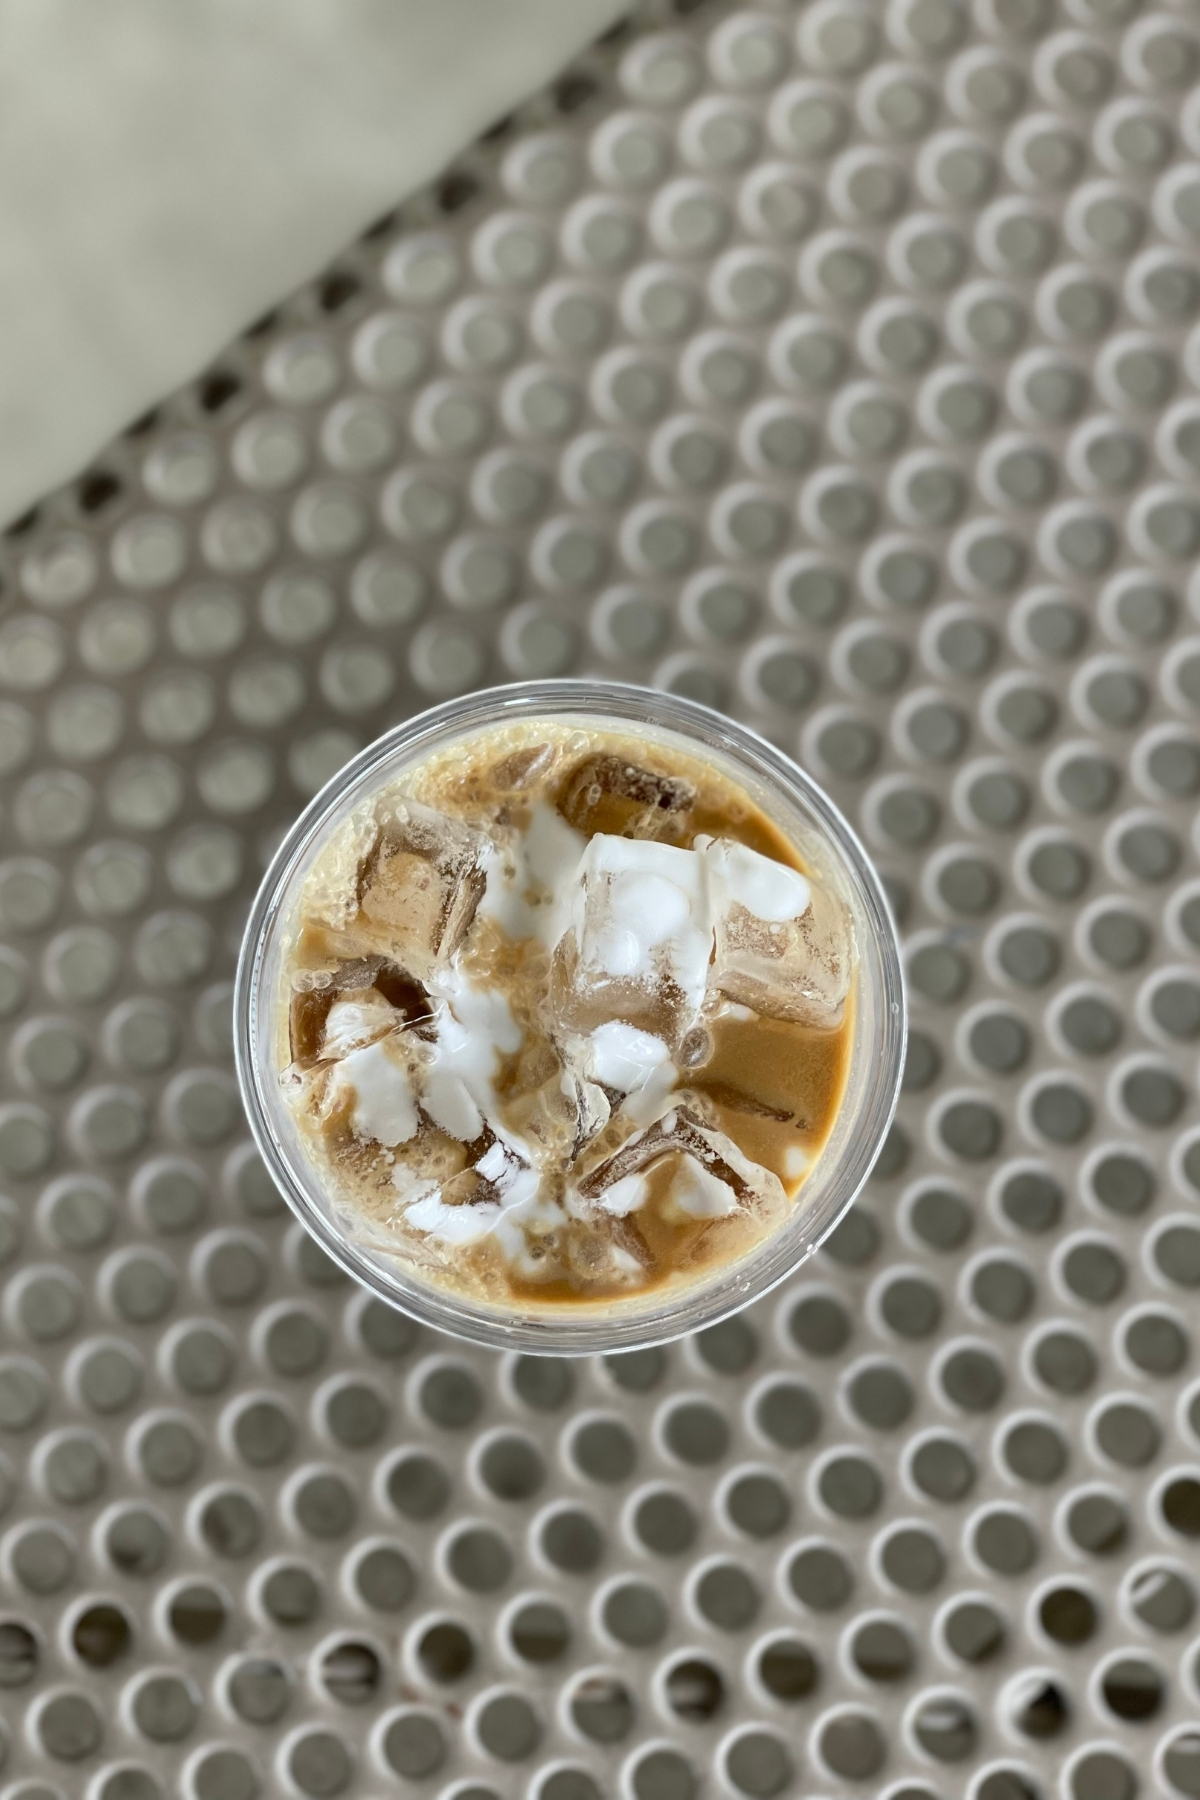 Top-down view of an iced Vietnamese coffee on top of an outdoor patio table.